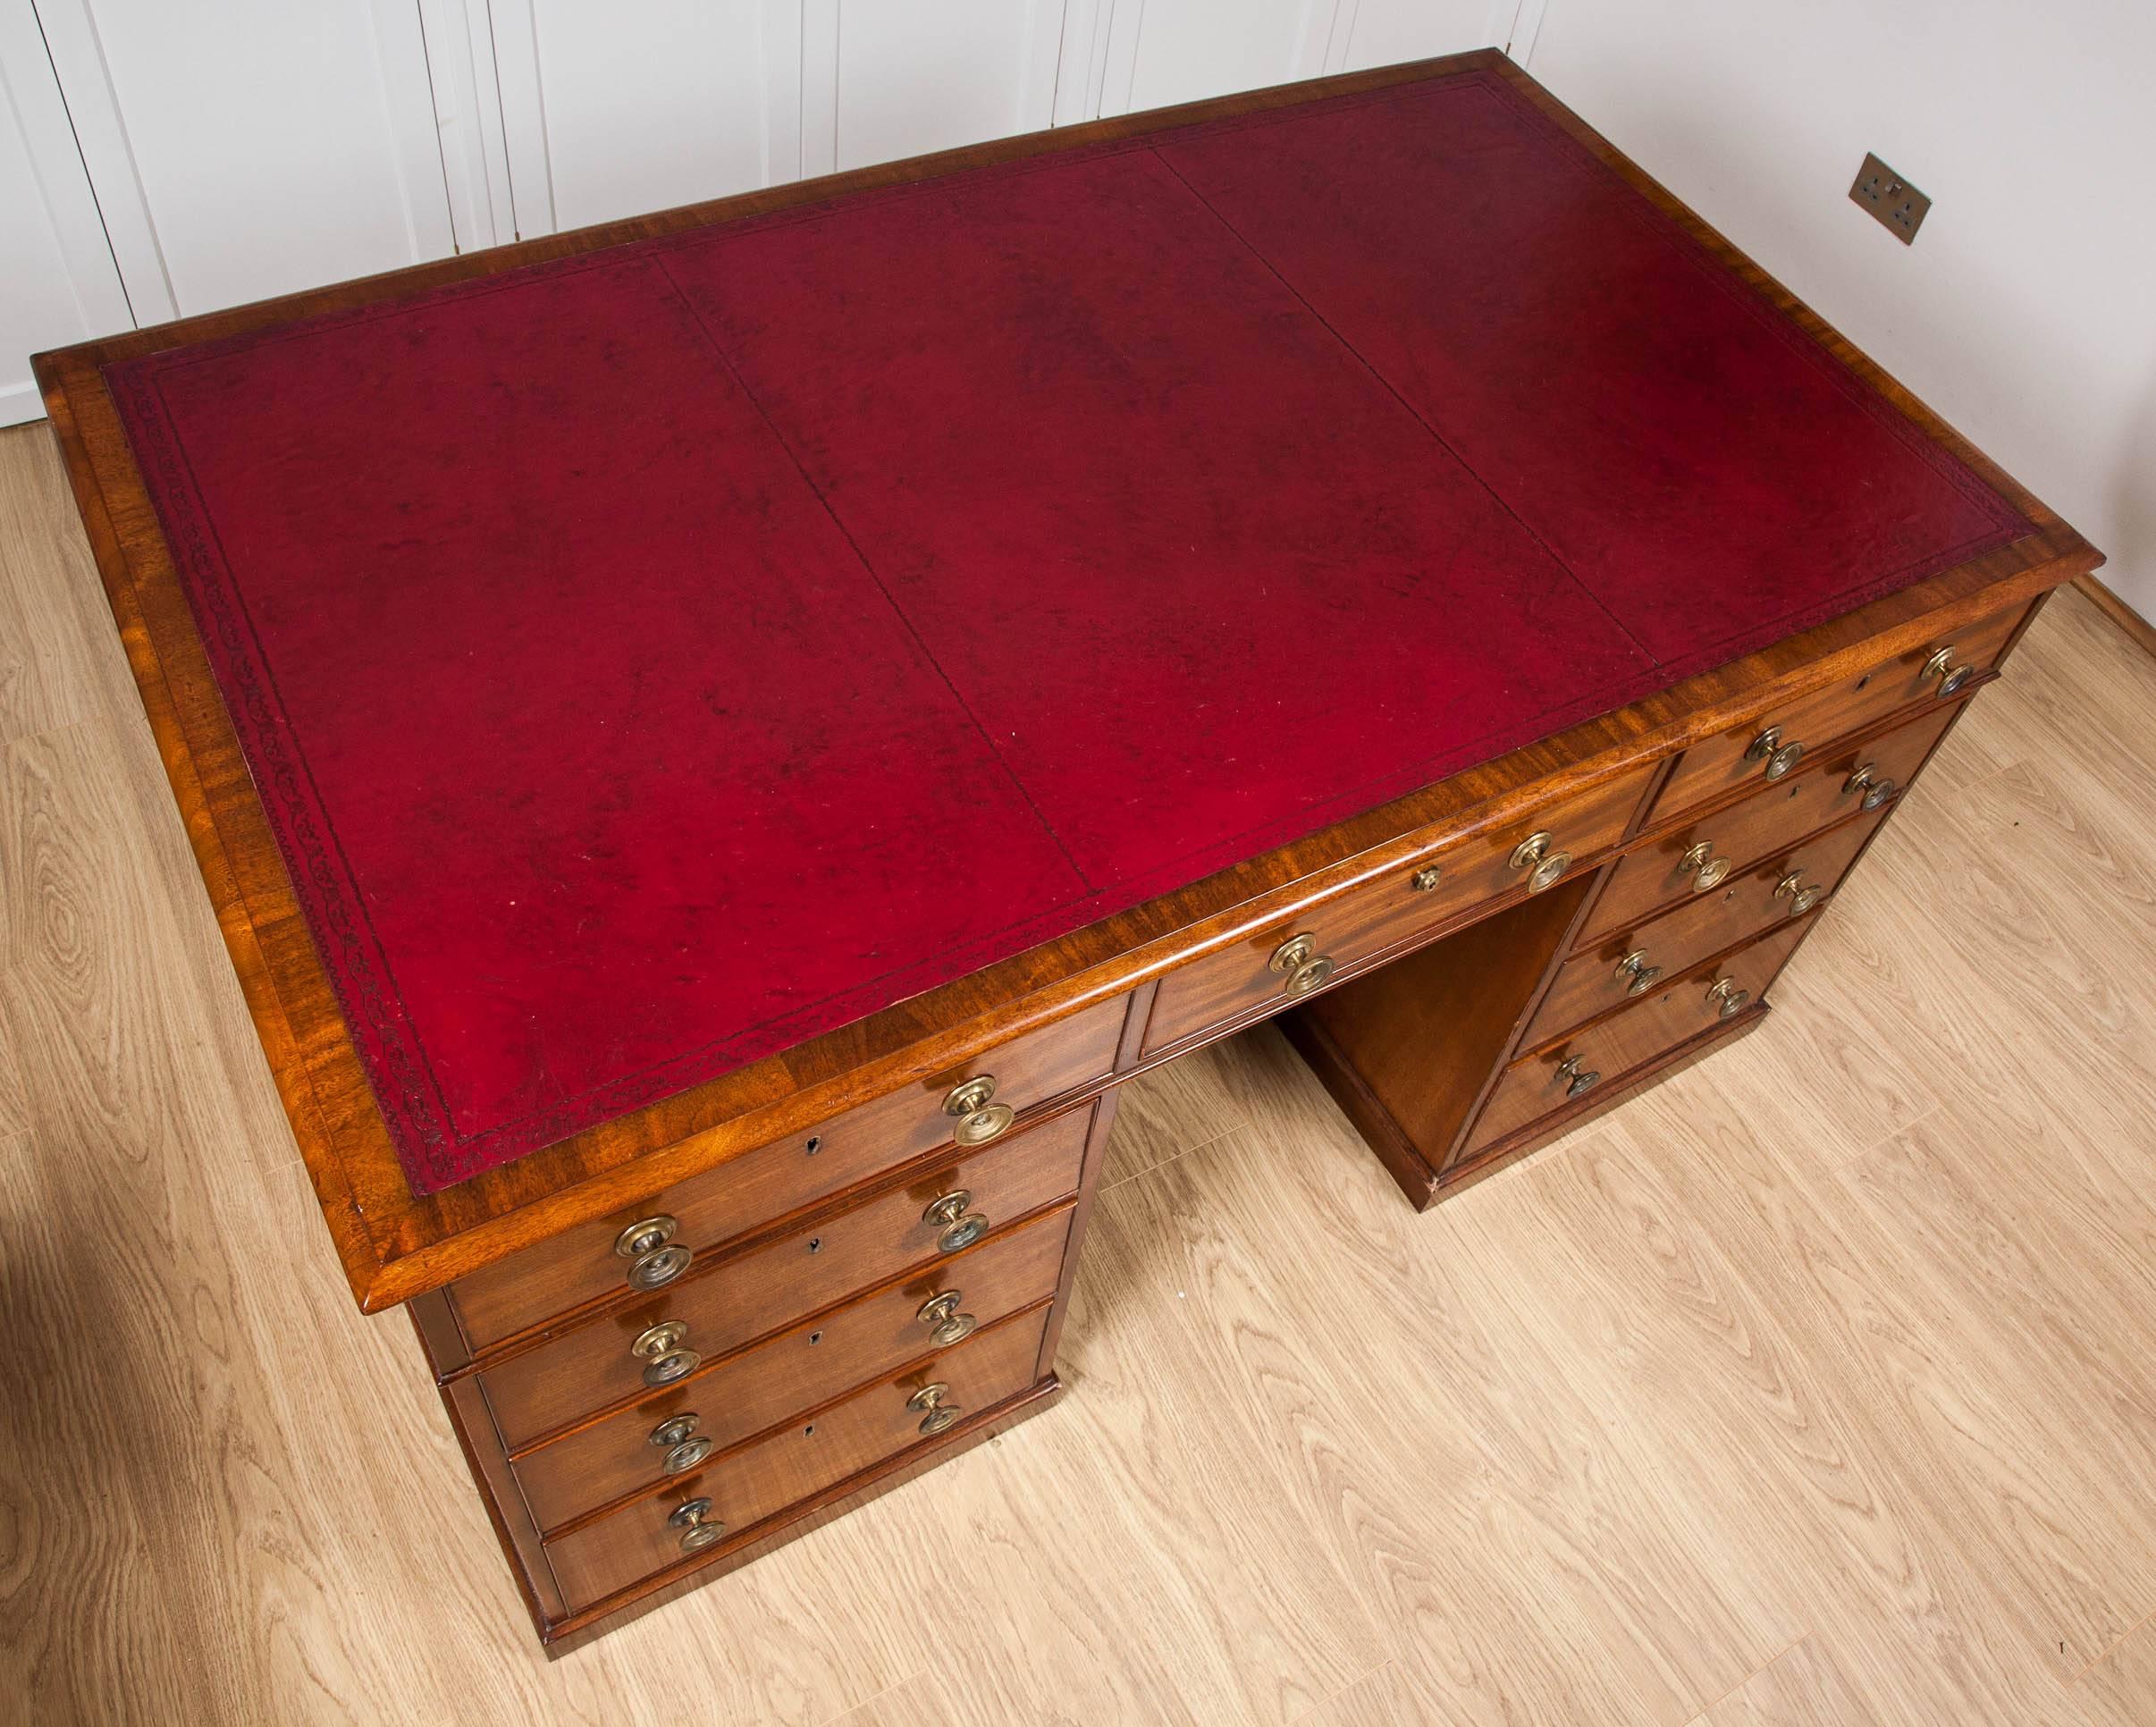 English Regency Period Early 19th century Mahogany Partners Desk with drawers both sides For Sale